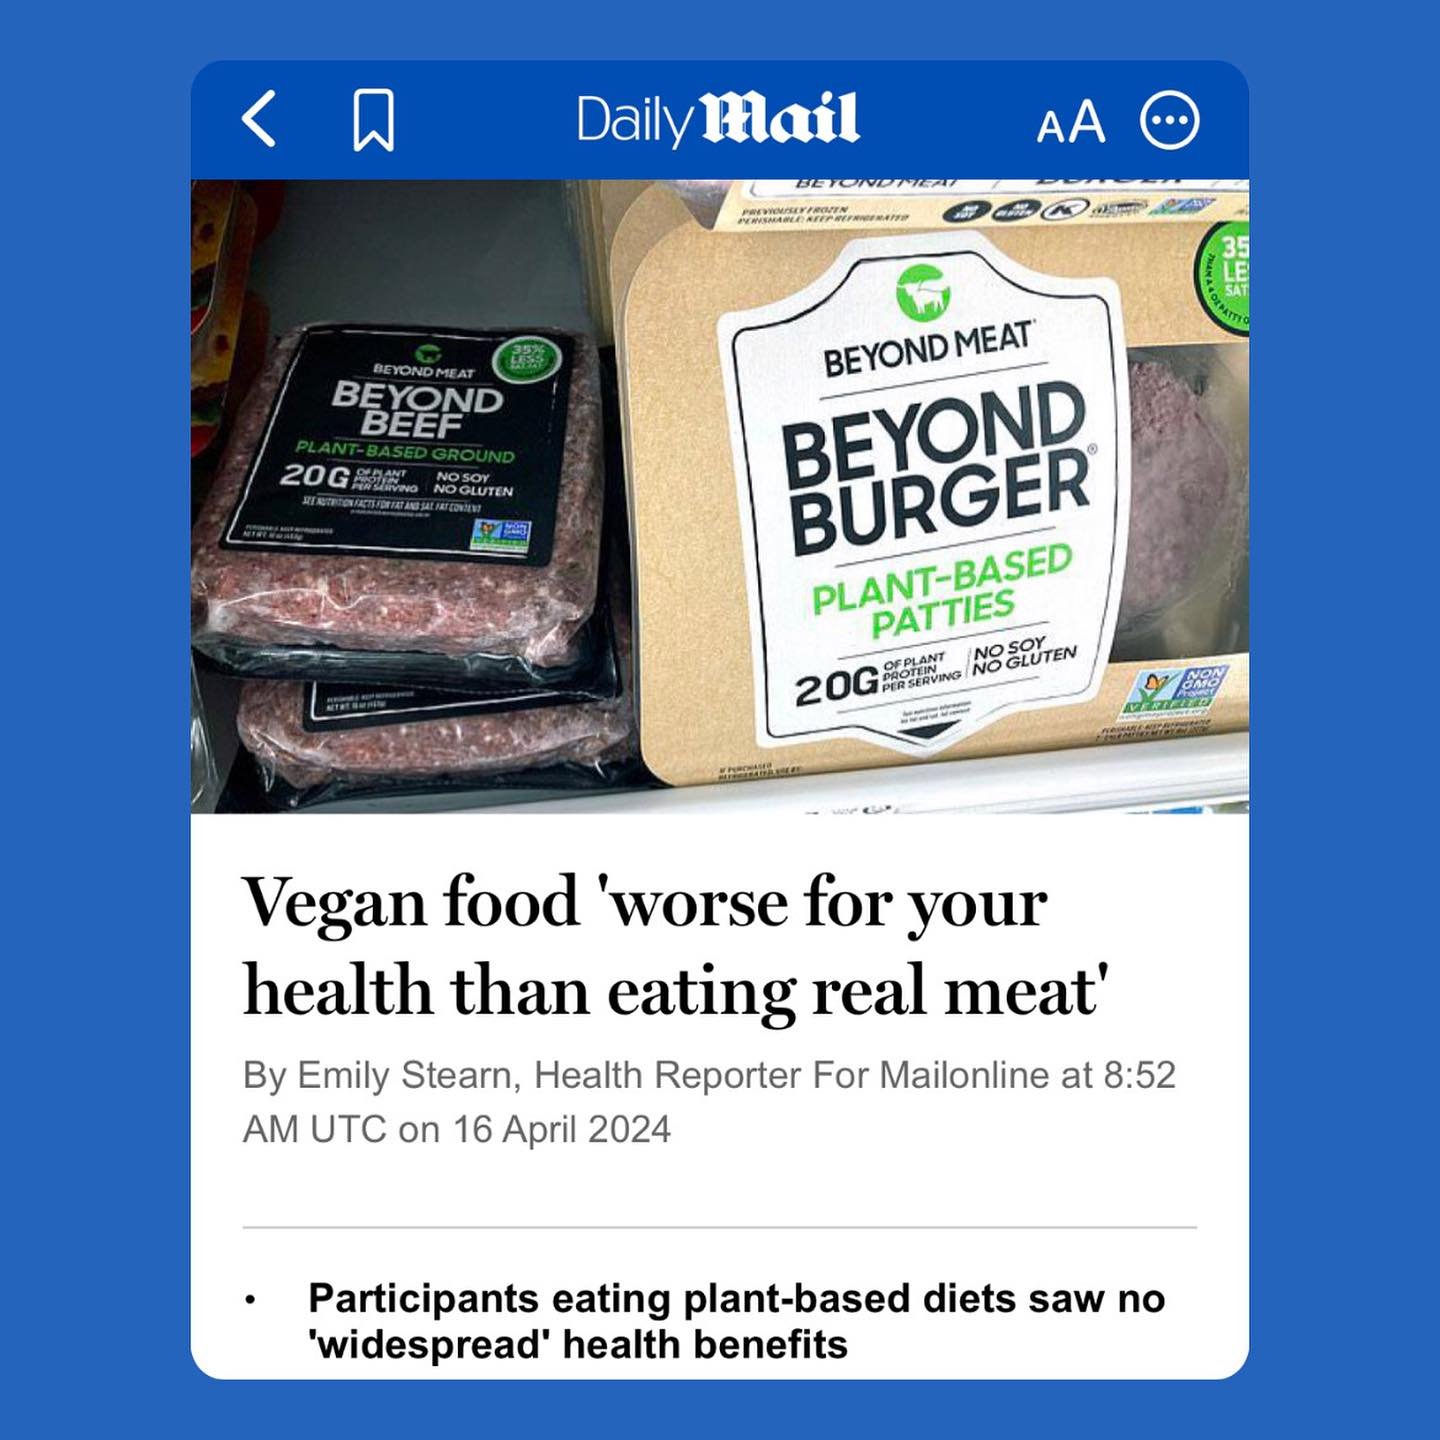 We&rsquo;ve been lied to. Going vegan is not better for your health or the planet.

WHOLE food plant based diets can be healthy in those who are overweight or obese but it&rsquo;s the QUALITY of the vegan diet that&rsquo;s going to move the needle.

